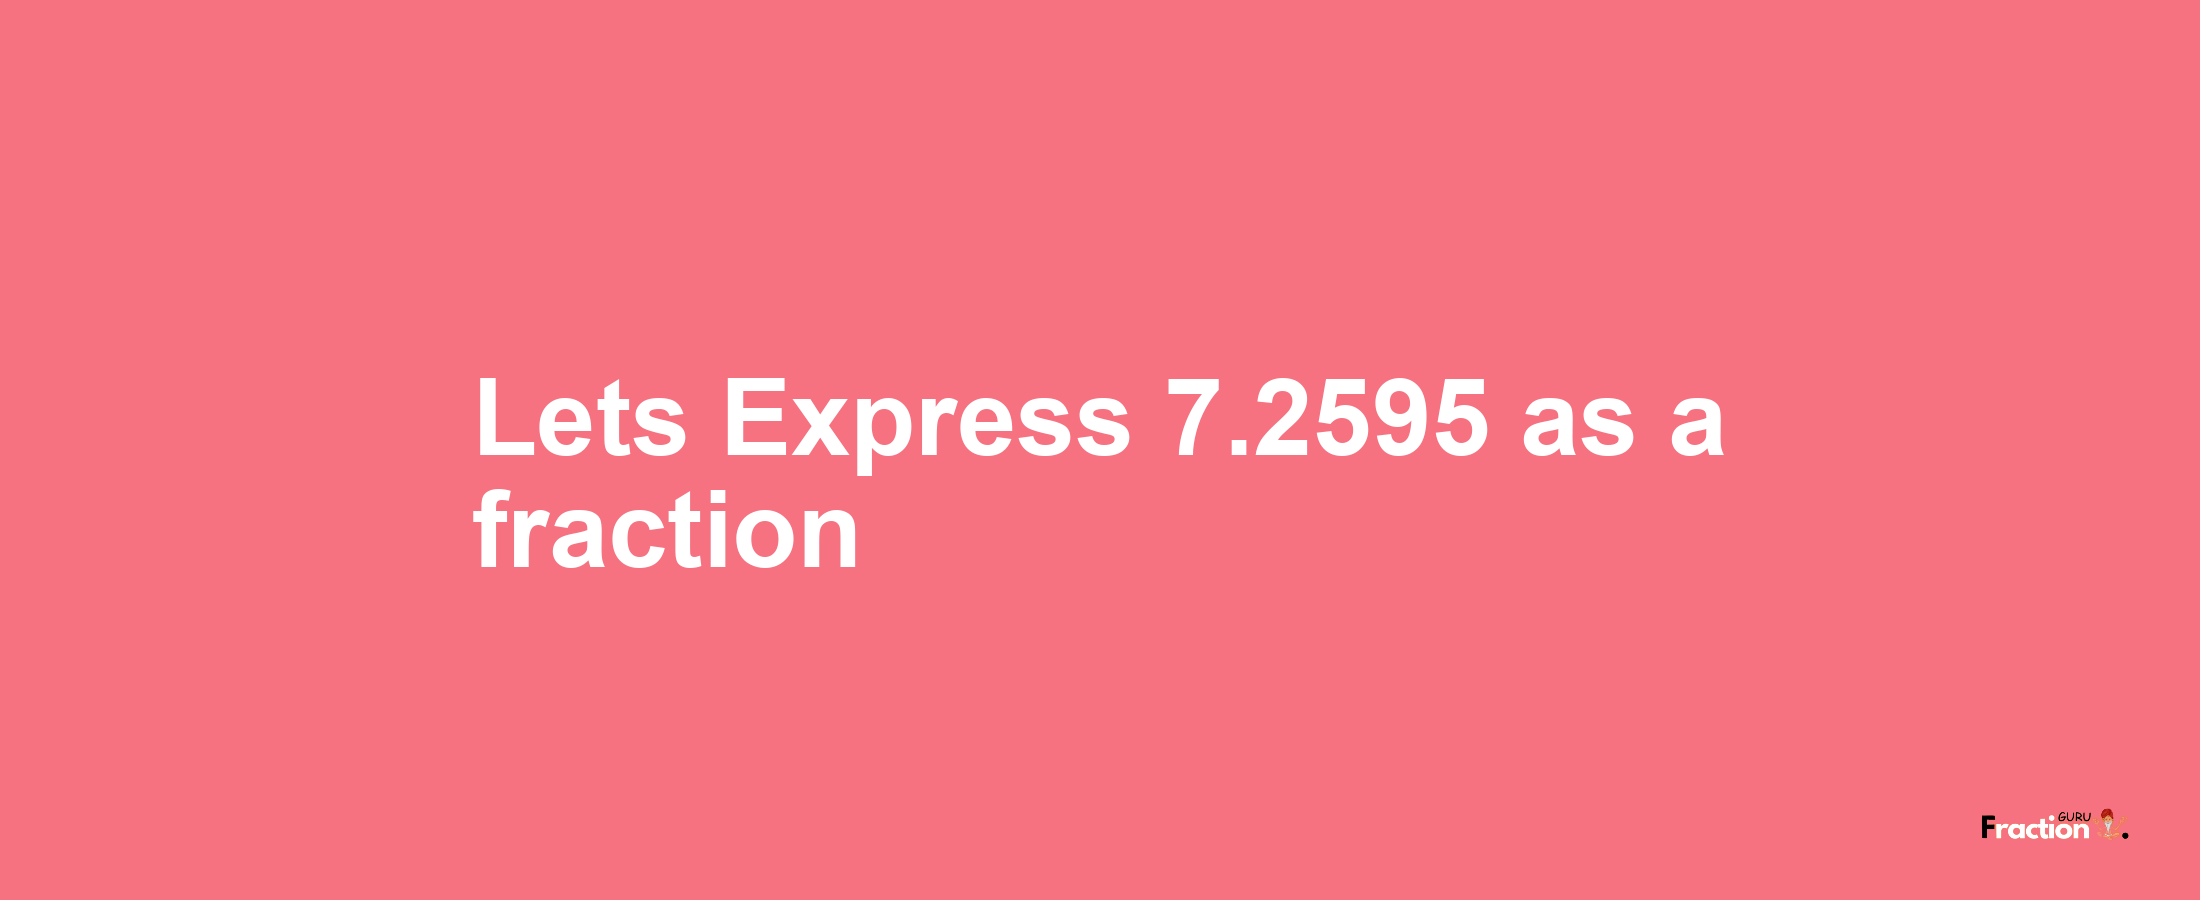 Lets Express 7.2595 as afraction